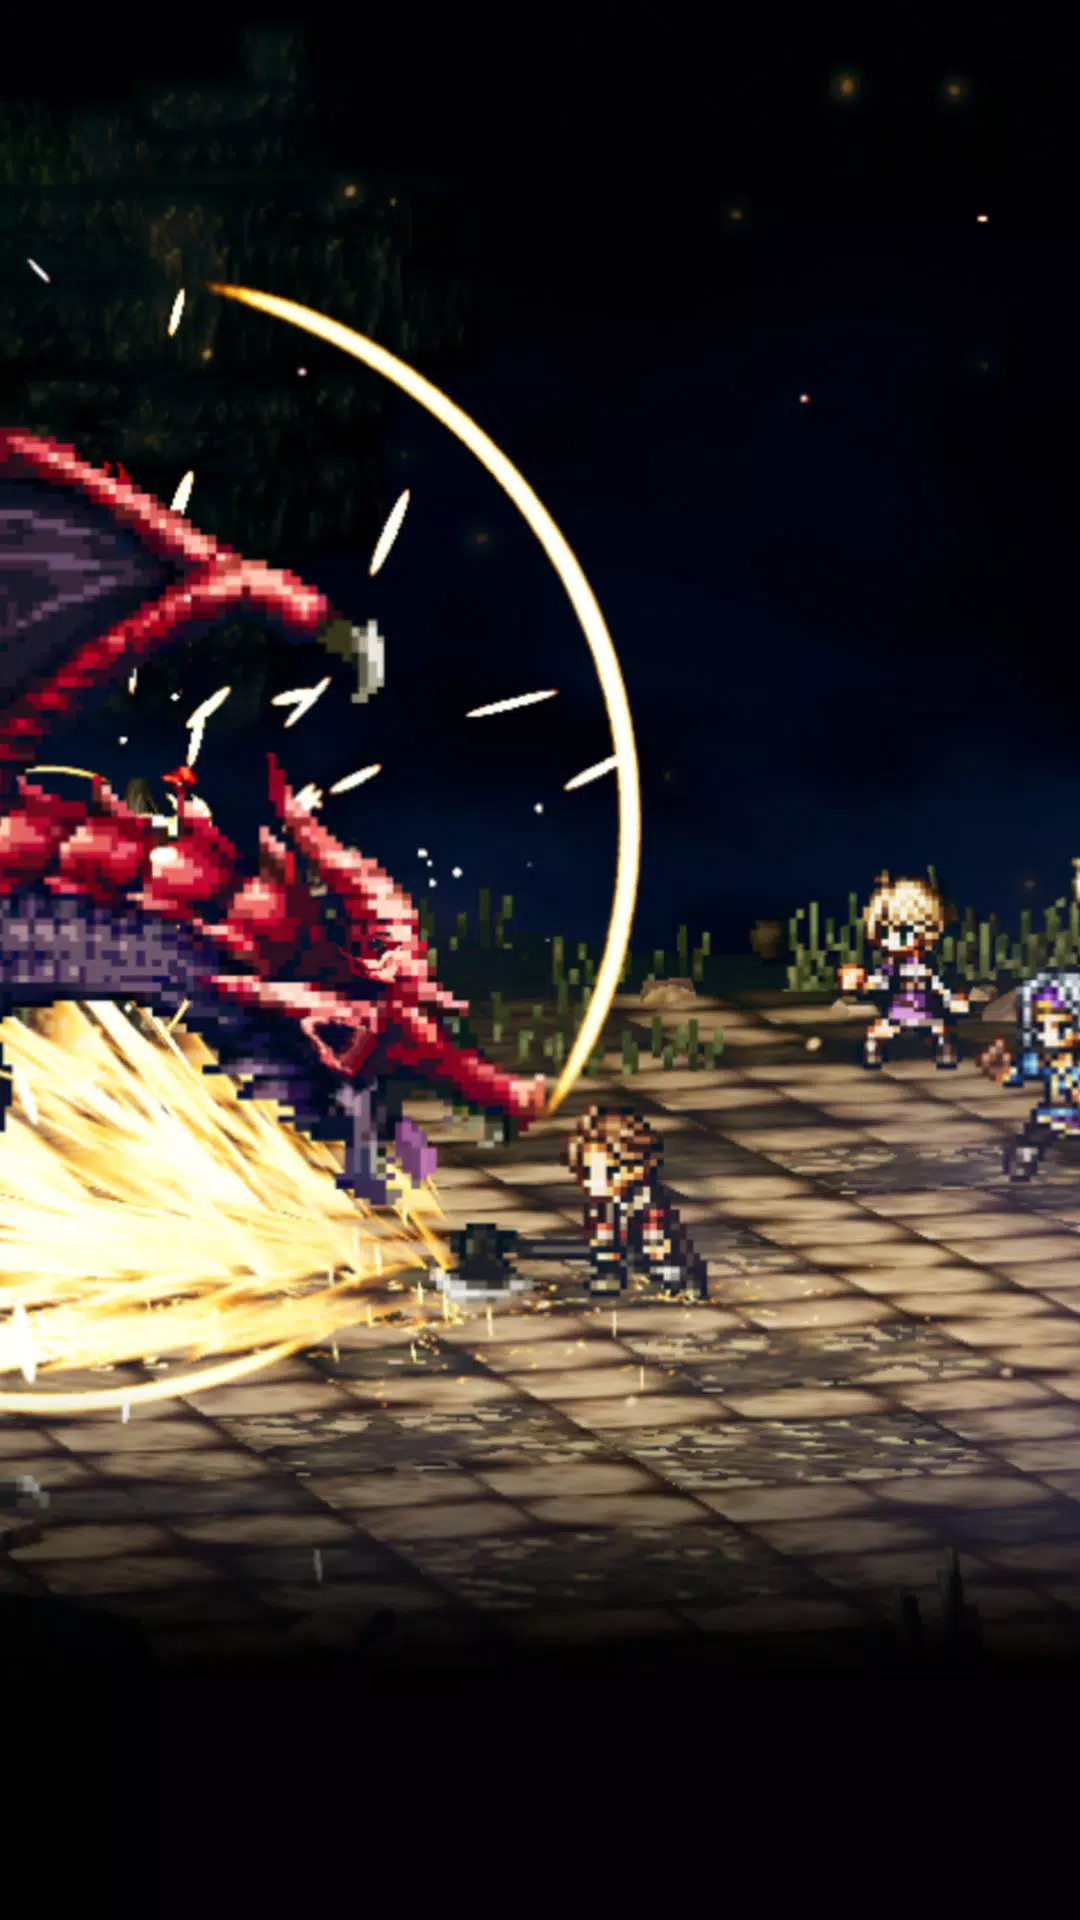 Download OCTOPATH TRAVELER: CotC 1.2.0 APK for android